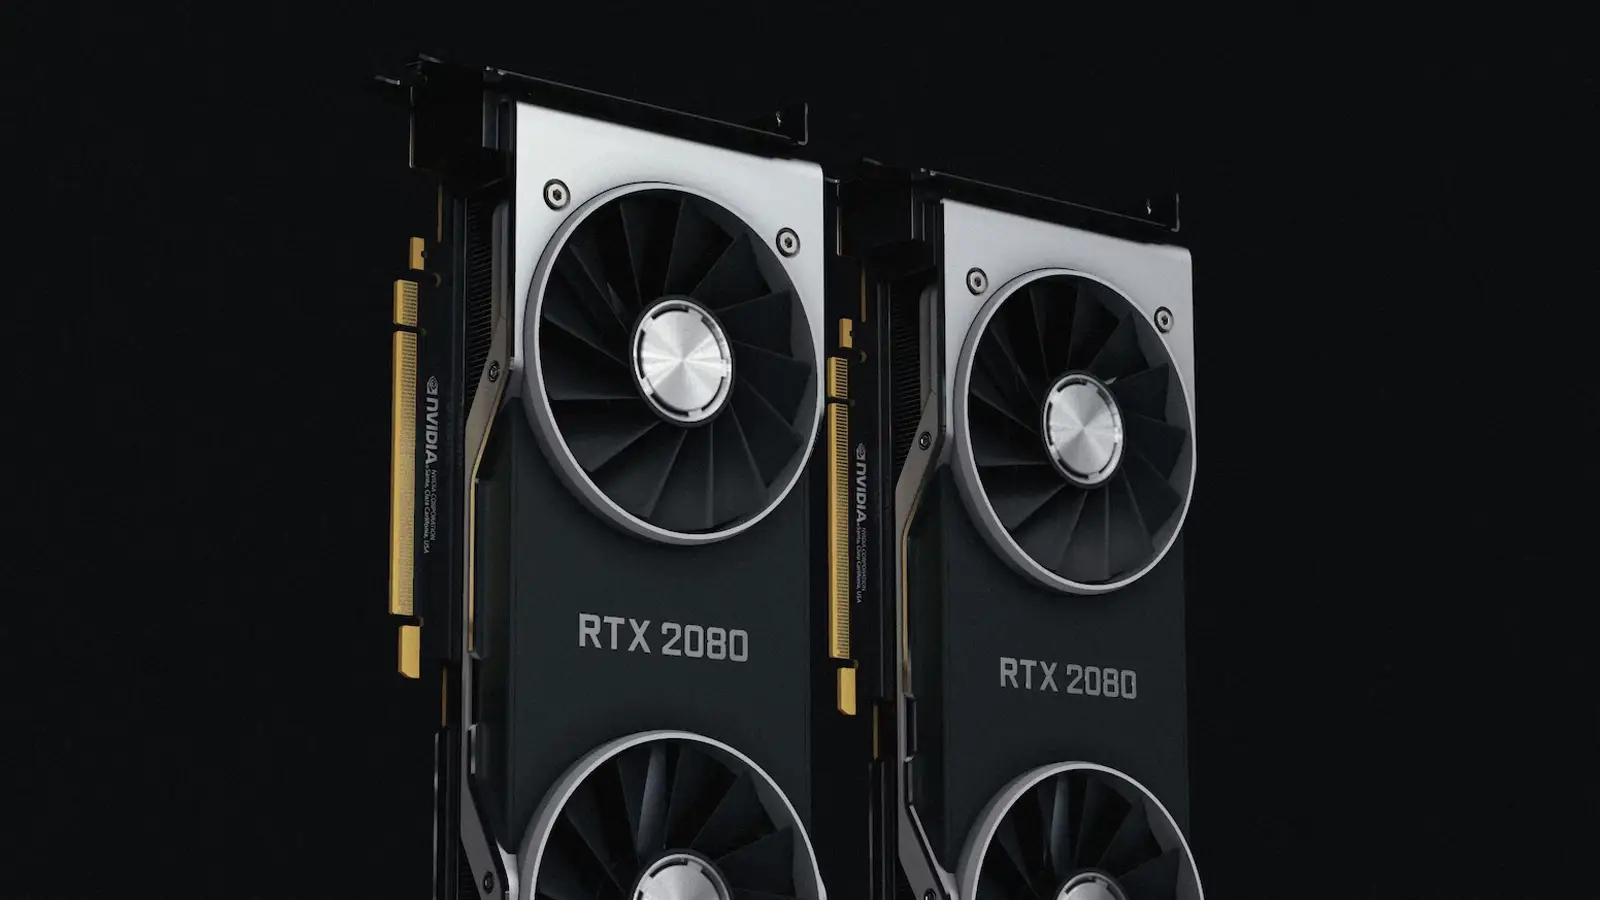 two nvidia rtx 2080 graphics cards on black background